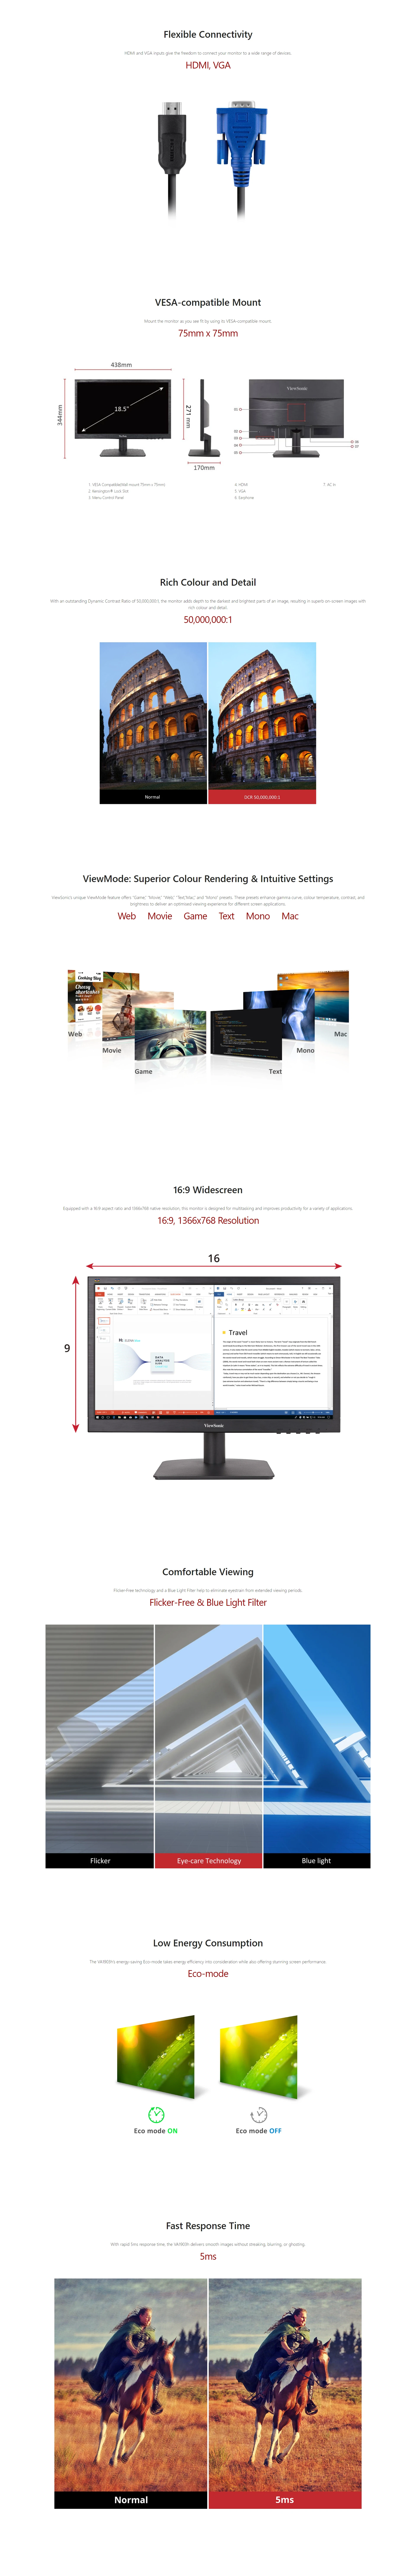 ViewSonic VA1903h 19” HD Home and Office Monitor